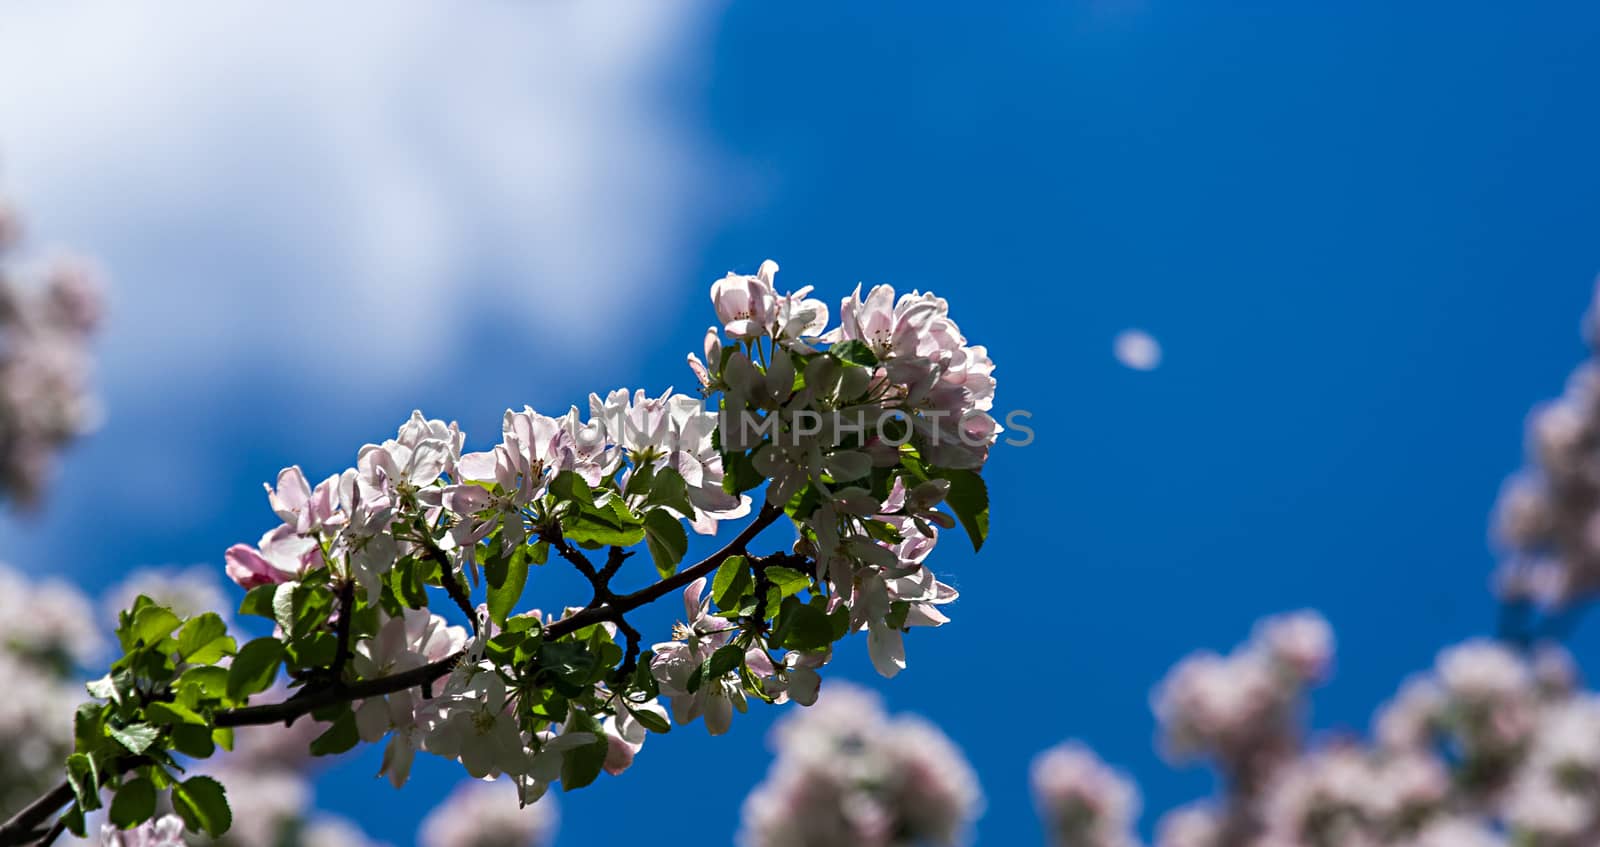 Branches of blossoming tree with pale pink flowers